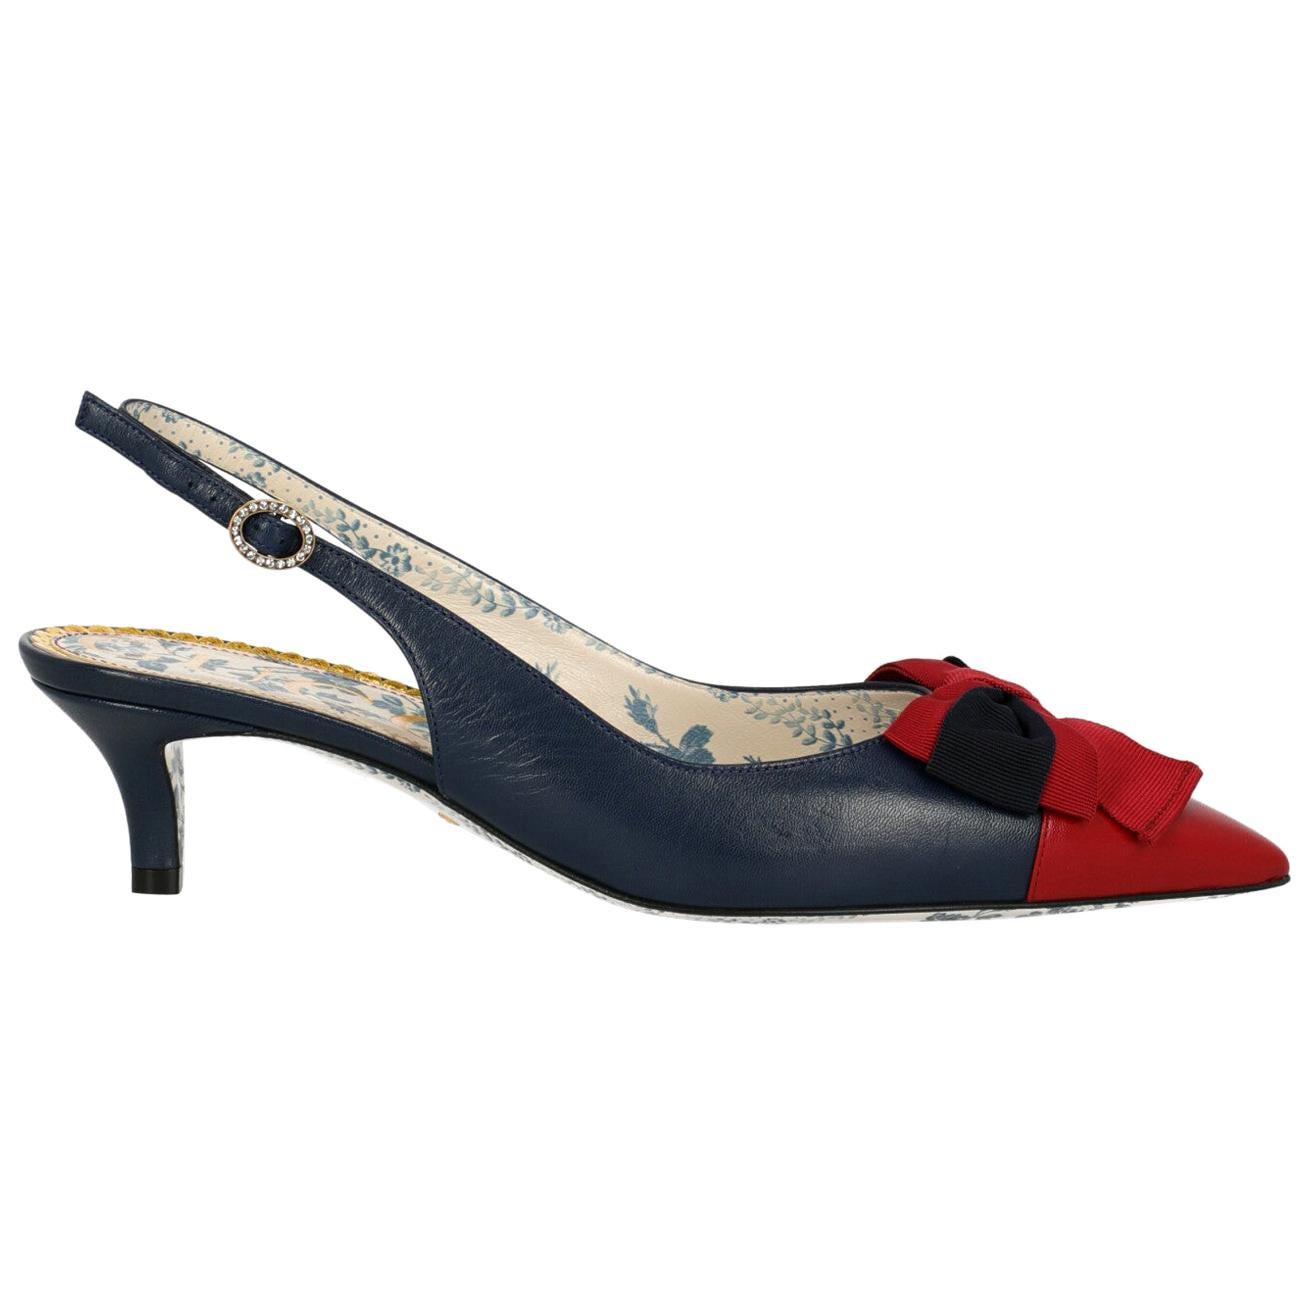 Gucci Women's Mules Navy/Red Leather IT 